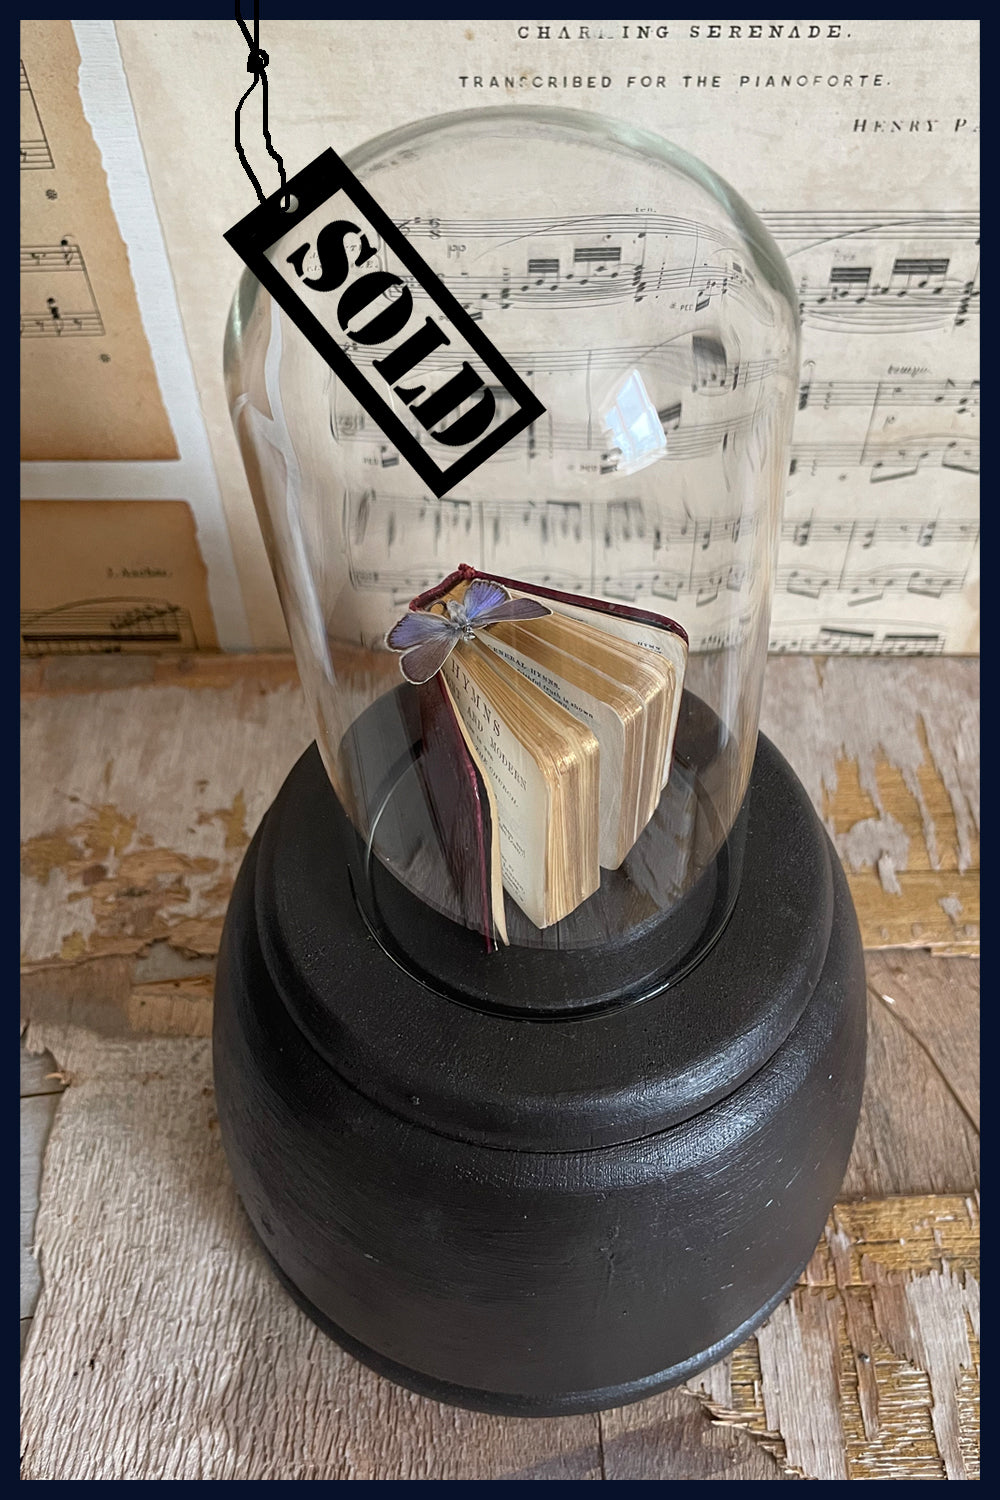 SOLD Enigma Variations Collection: Antique Miniature Hymn Book with a Butterfly in a Display Dome